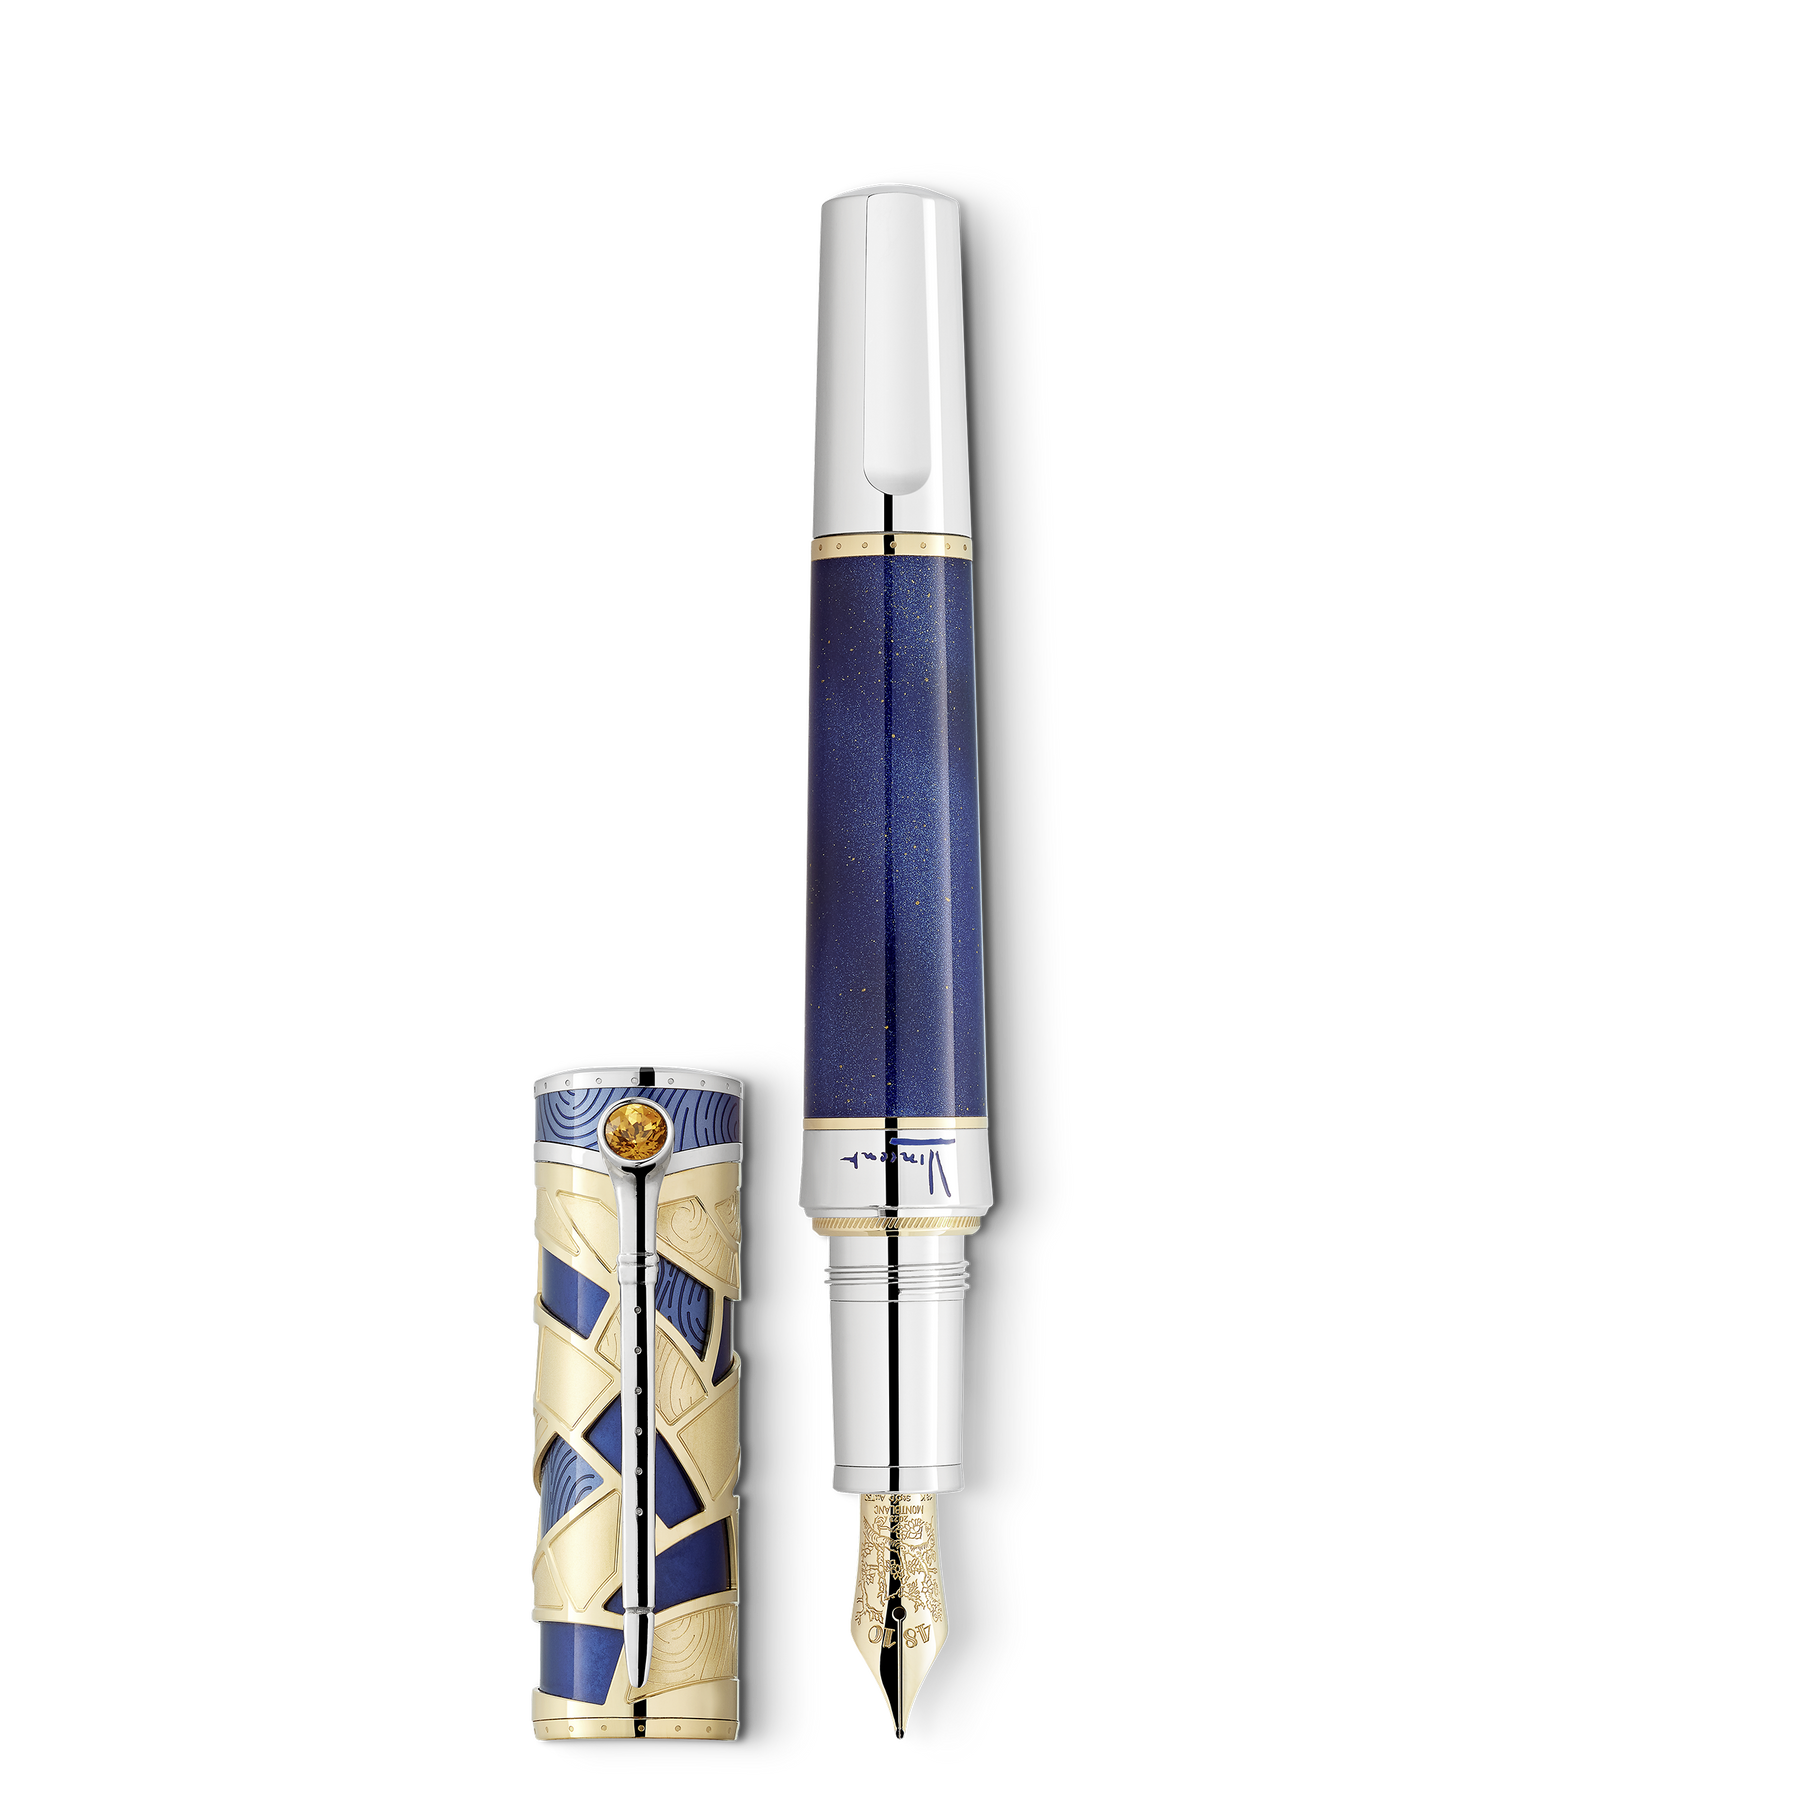 Masters of Art Homage to Vincent van Gogh Limited Edition 888 Fountain Pen